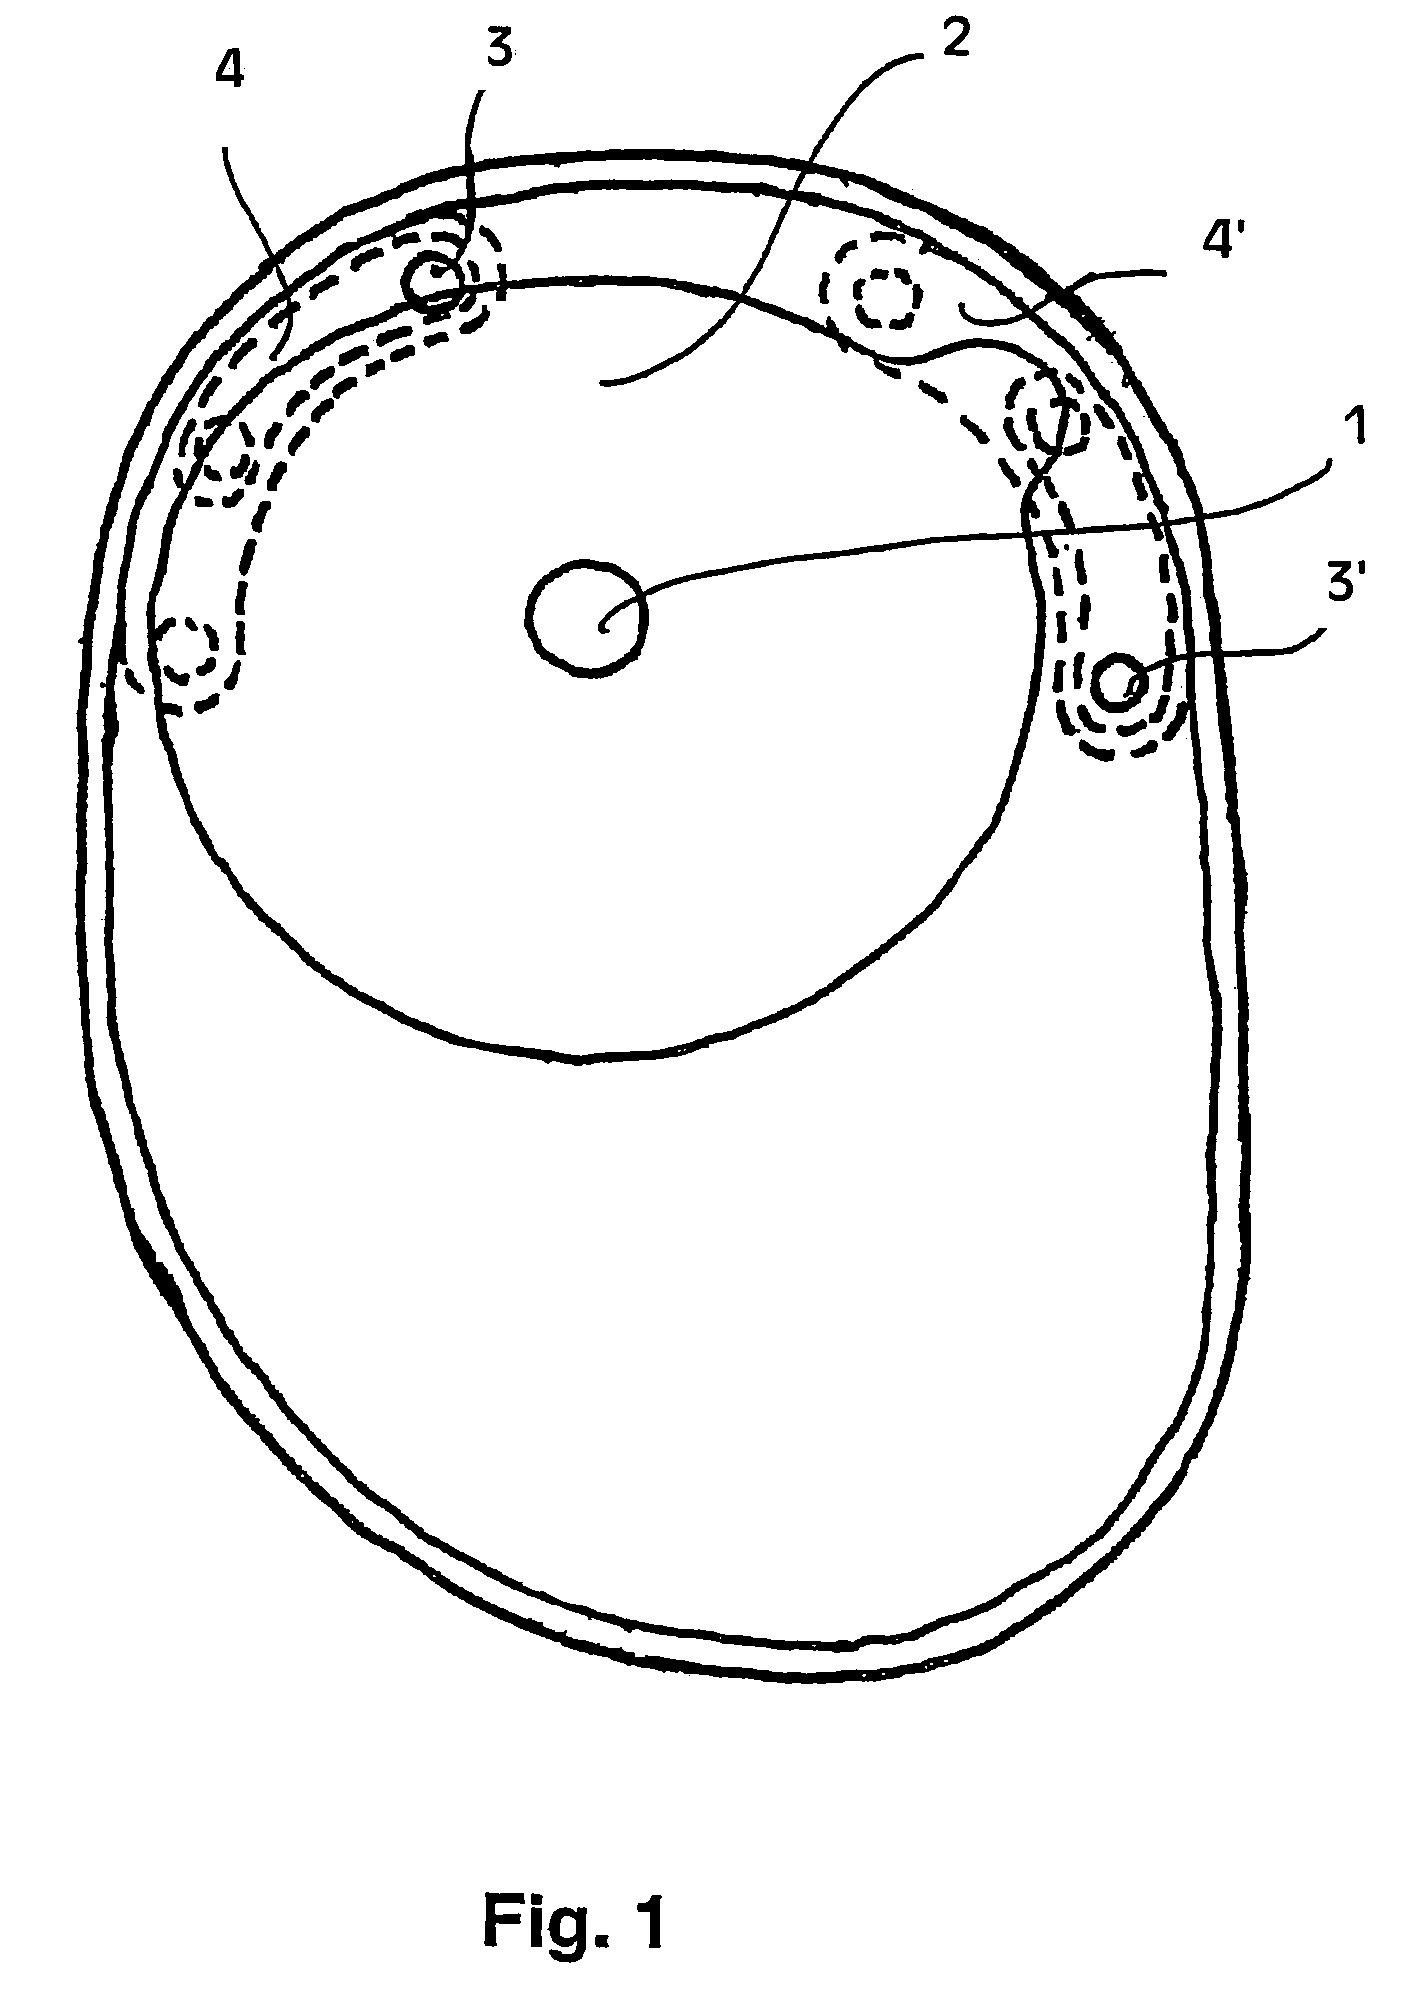 Ostomy appliance with multiple openings for preventing filter input blockage